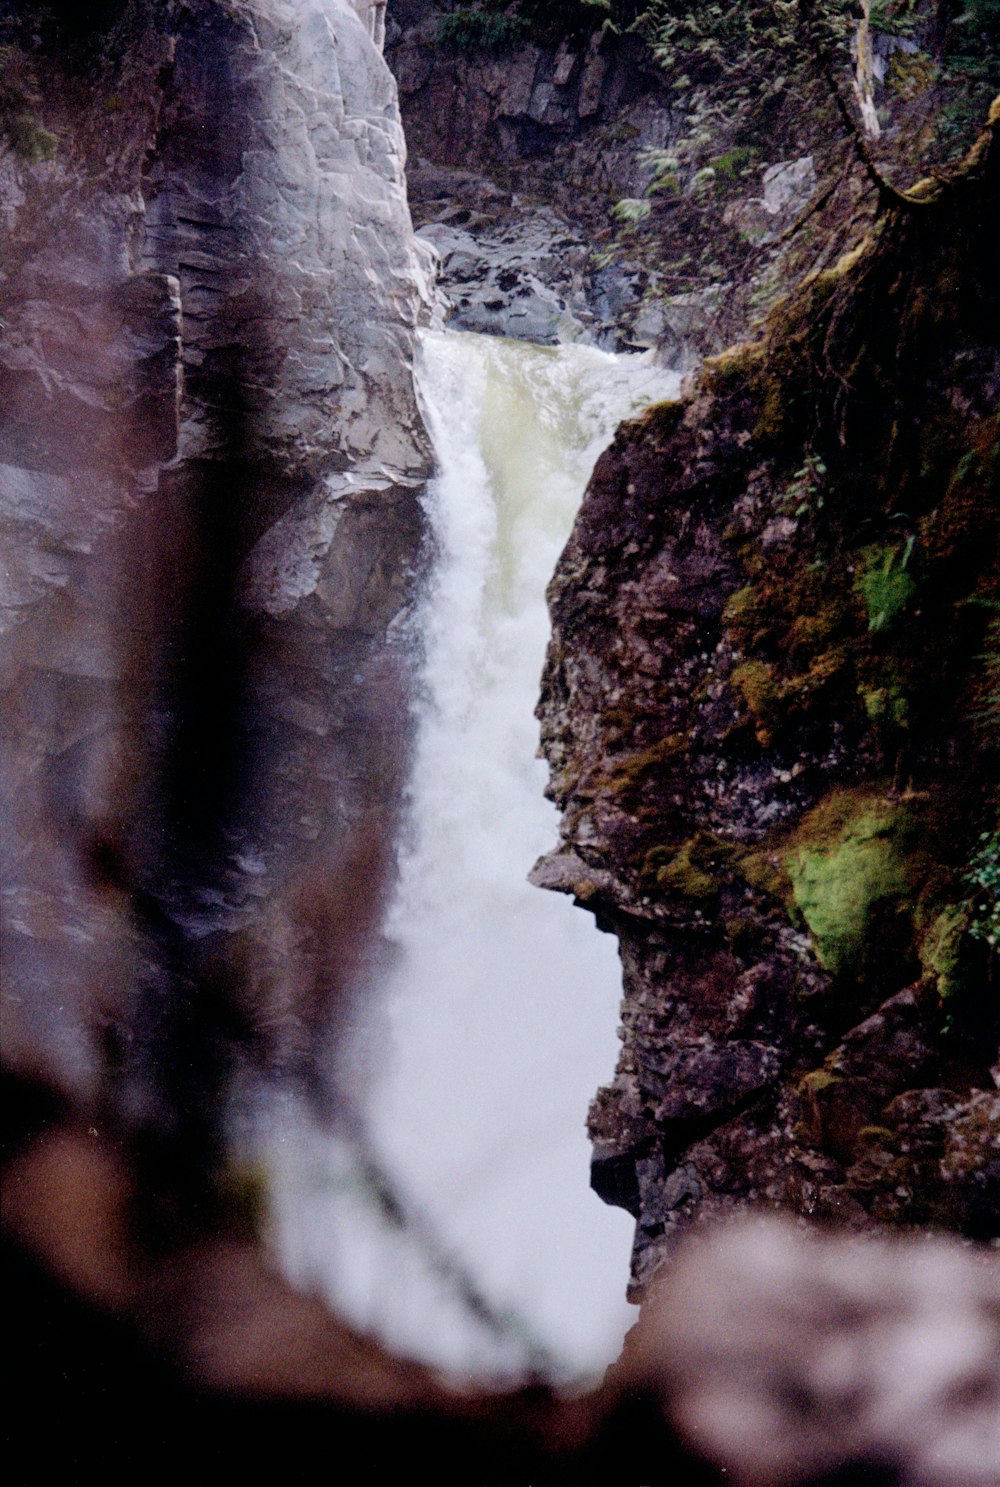 a view of a waterfall from the side of a cliff